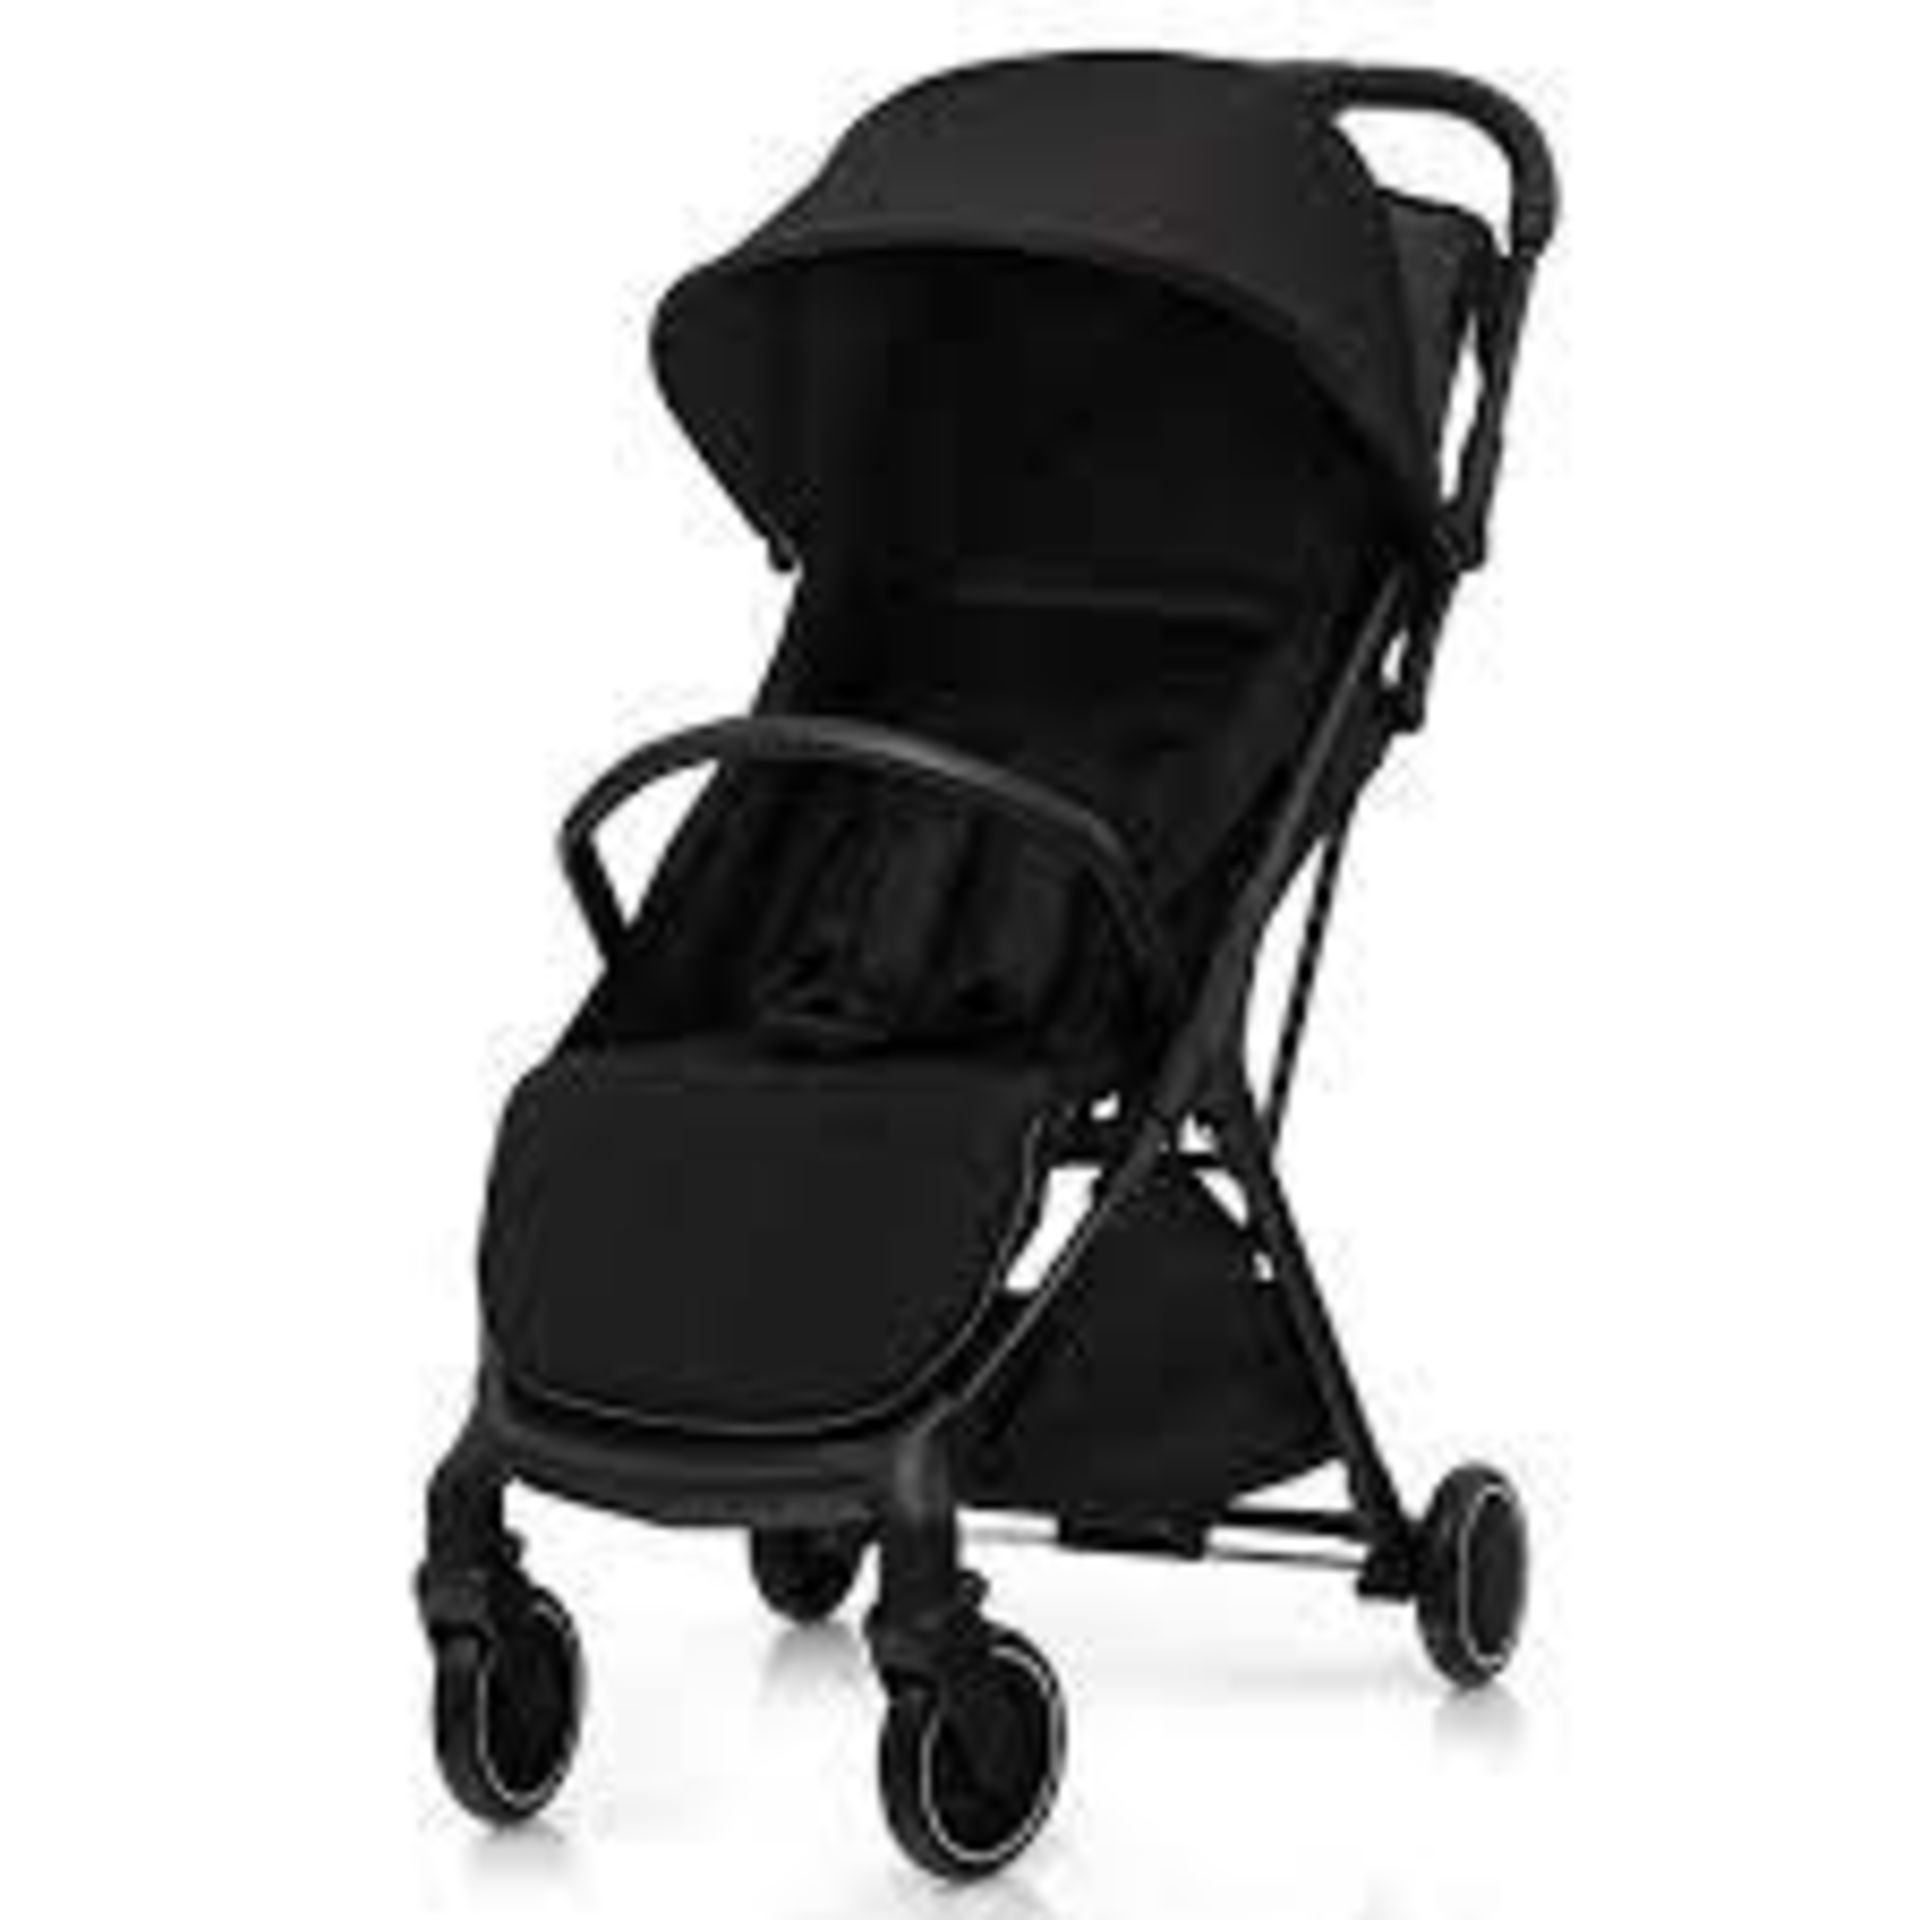 Lightweight Baby Stroller with Detachable Seat Cover-Black - ER54